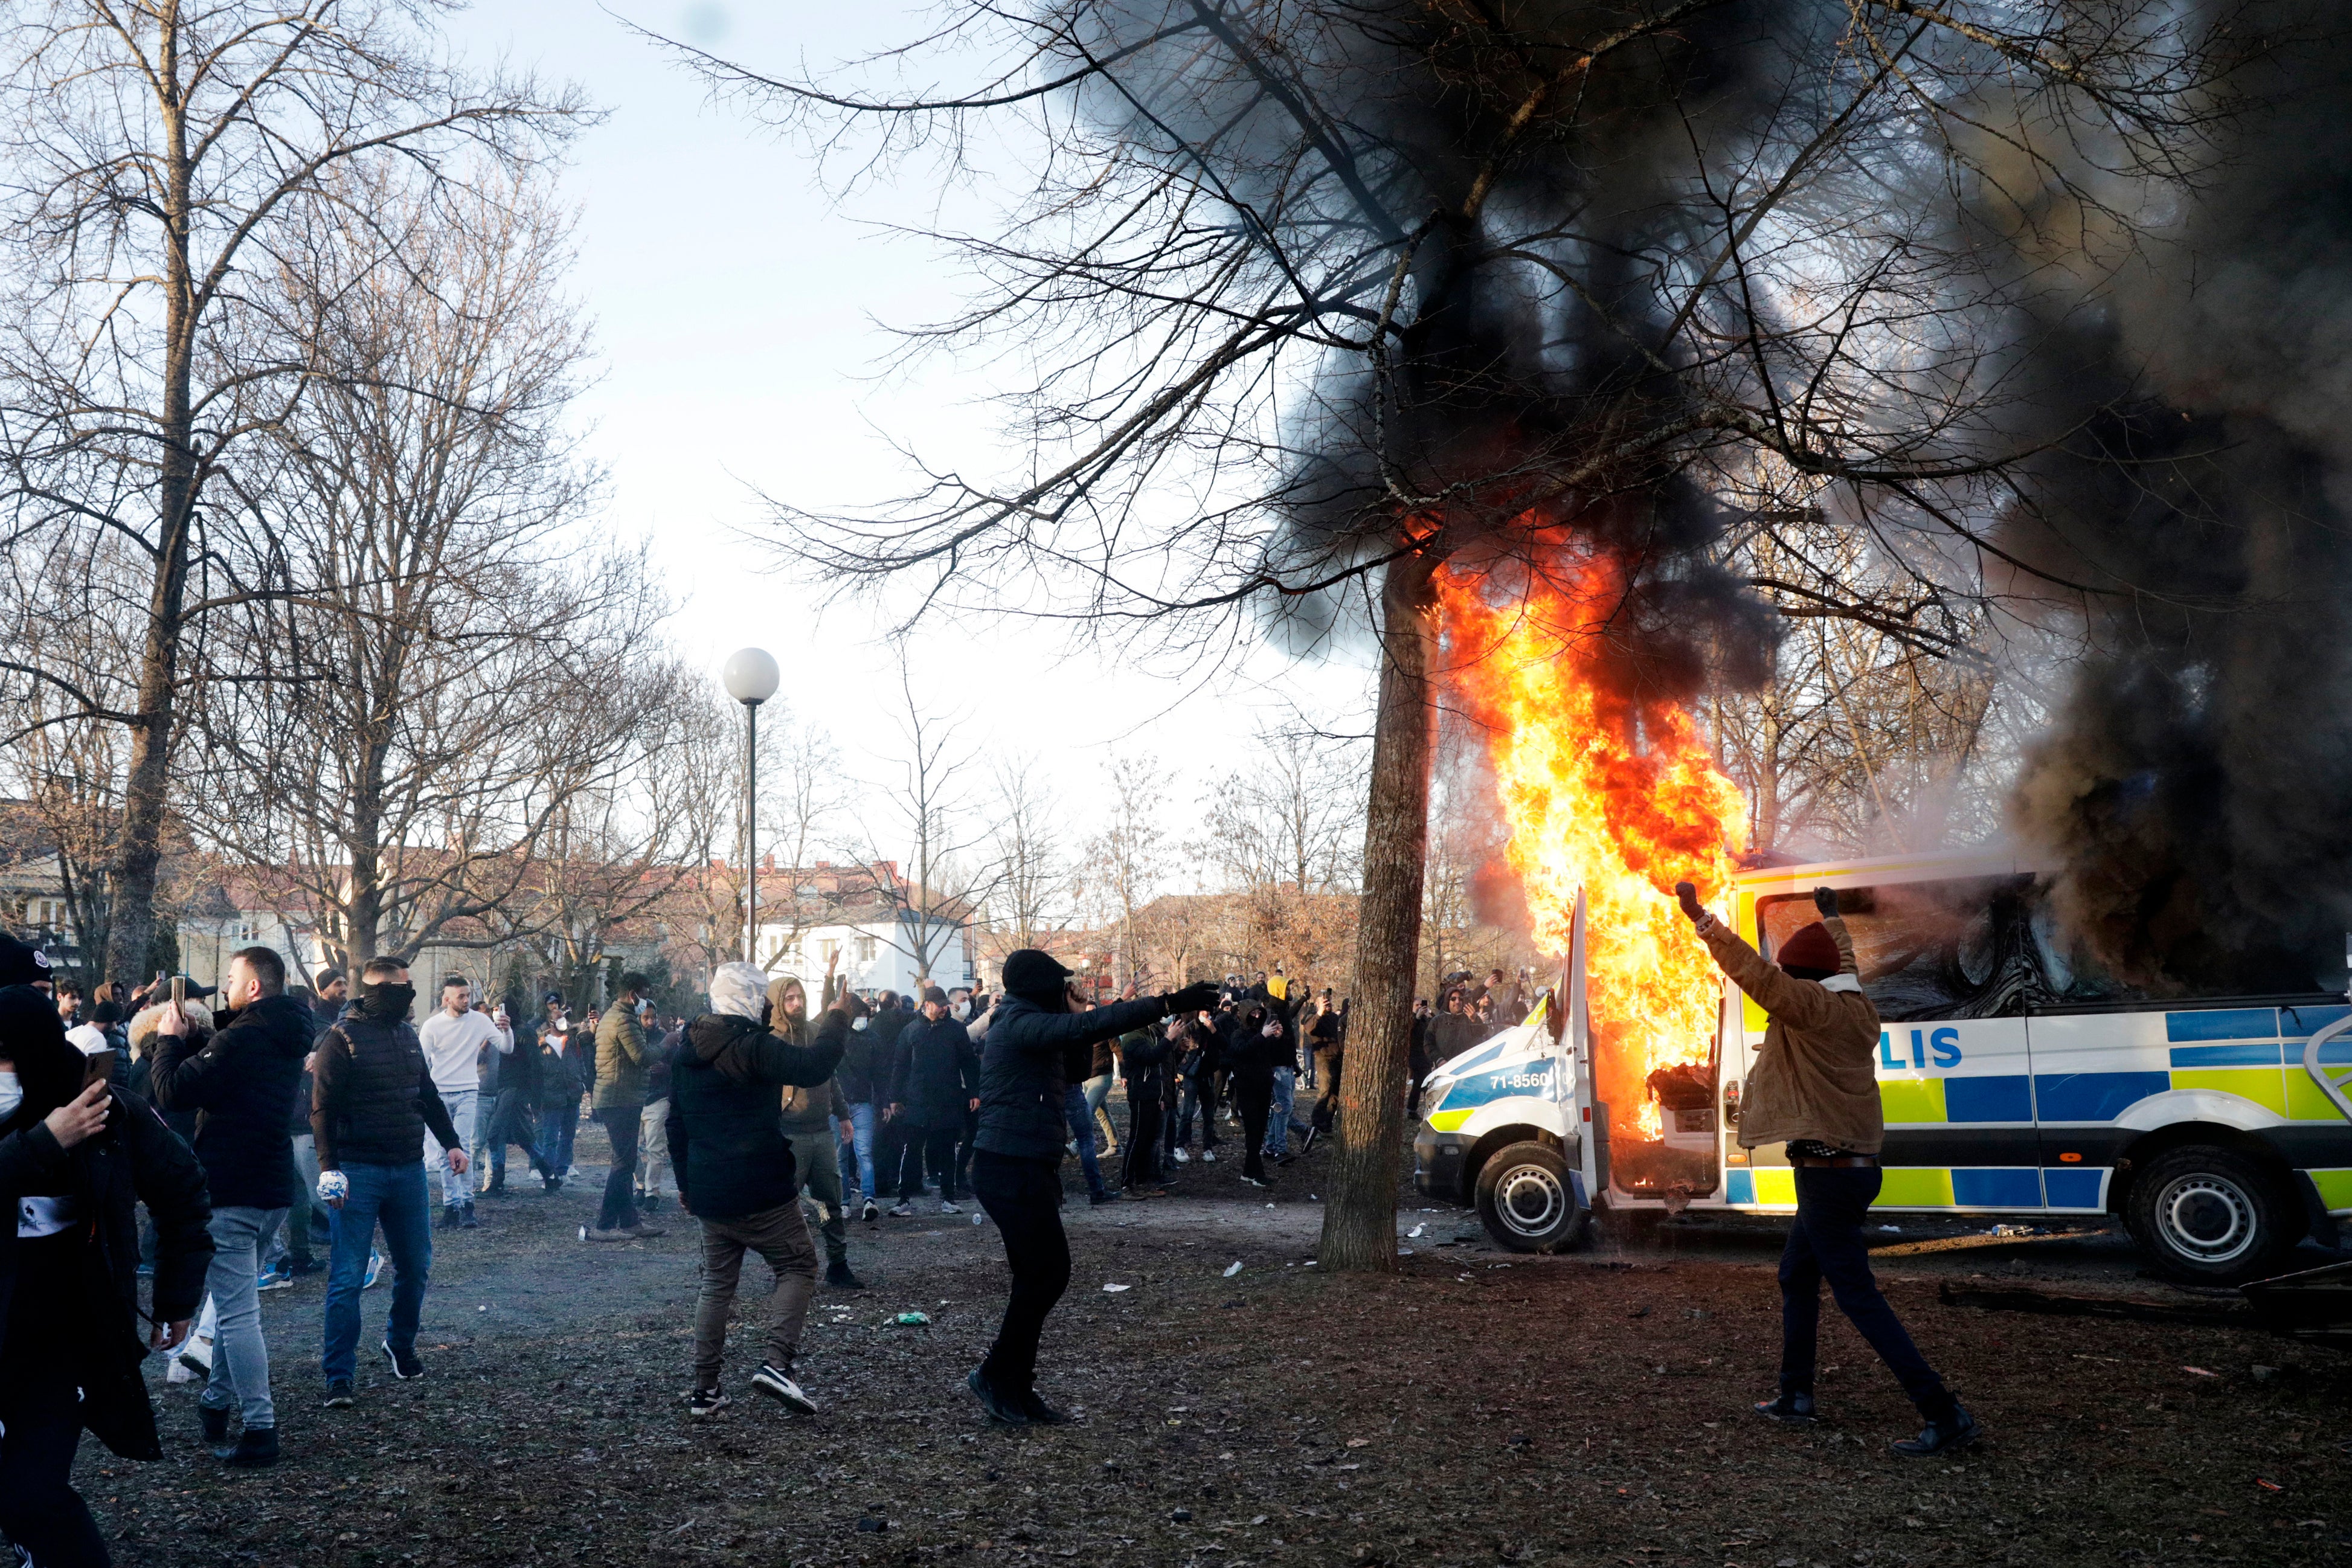 The riots will also play into fears in Sweden that their policy of welcoming refugees and immigrants has turned sour